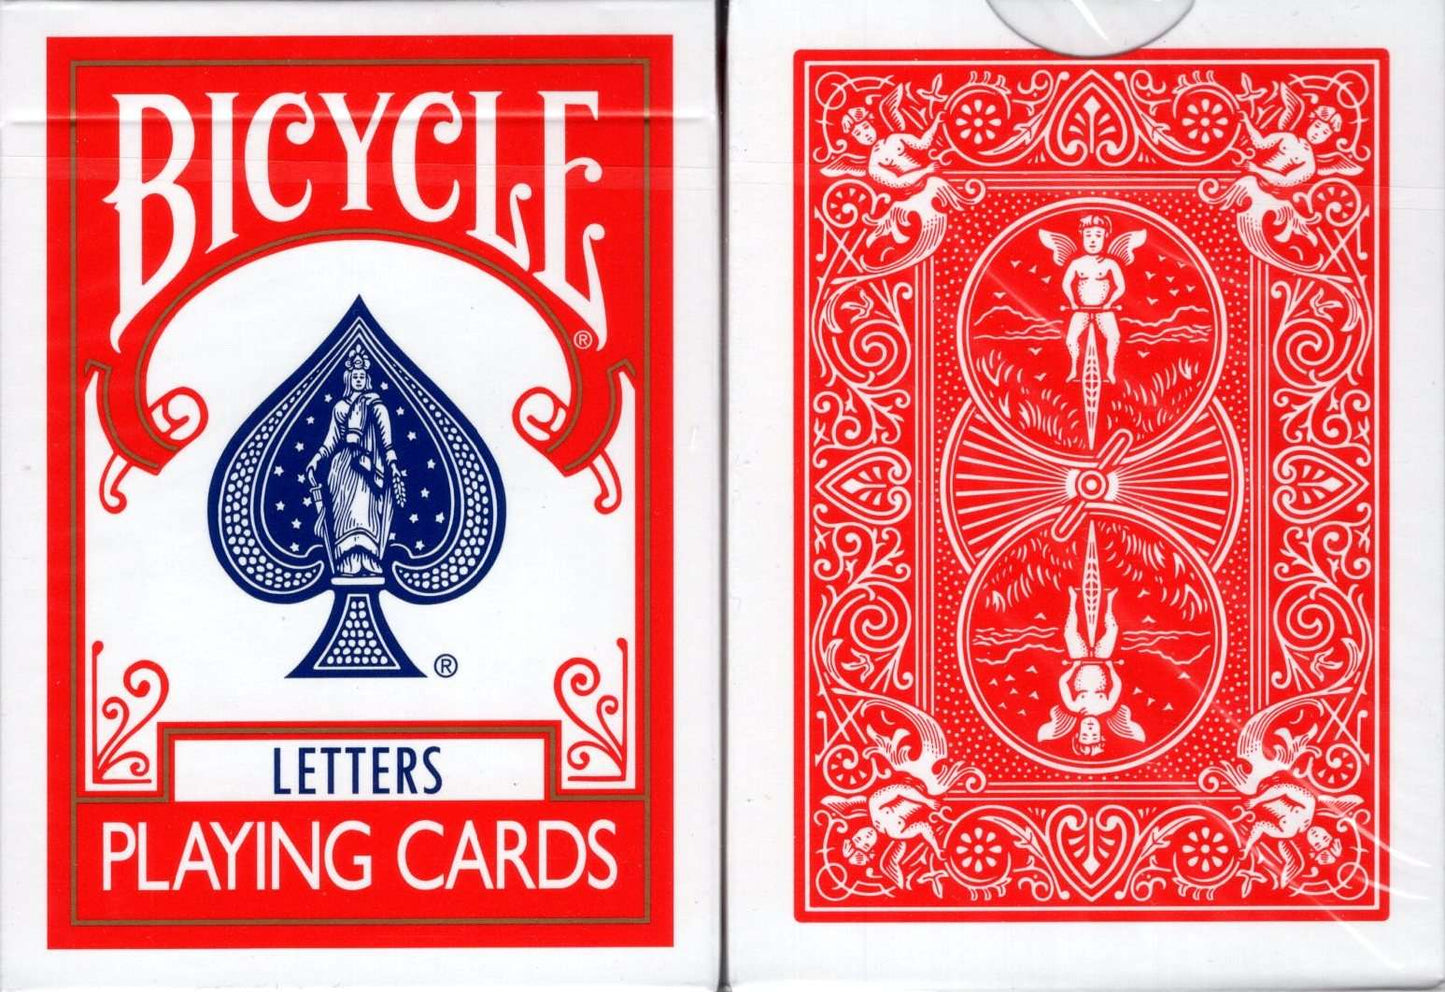 Letters Gaff Bicycle Playing Cards